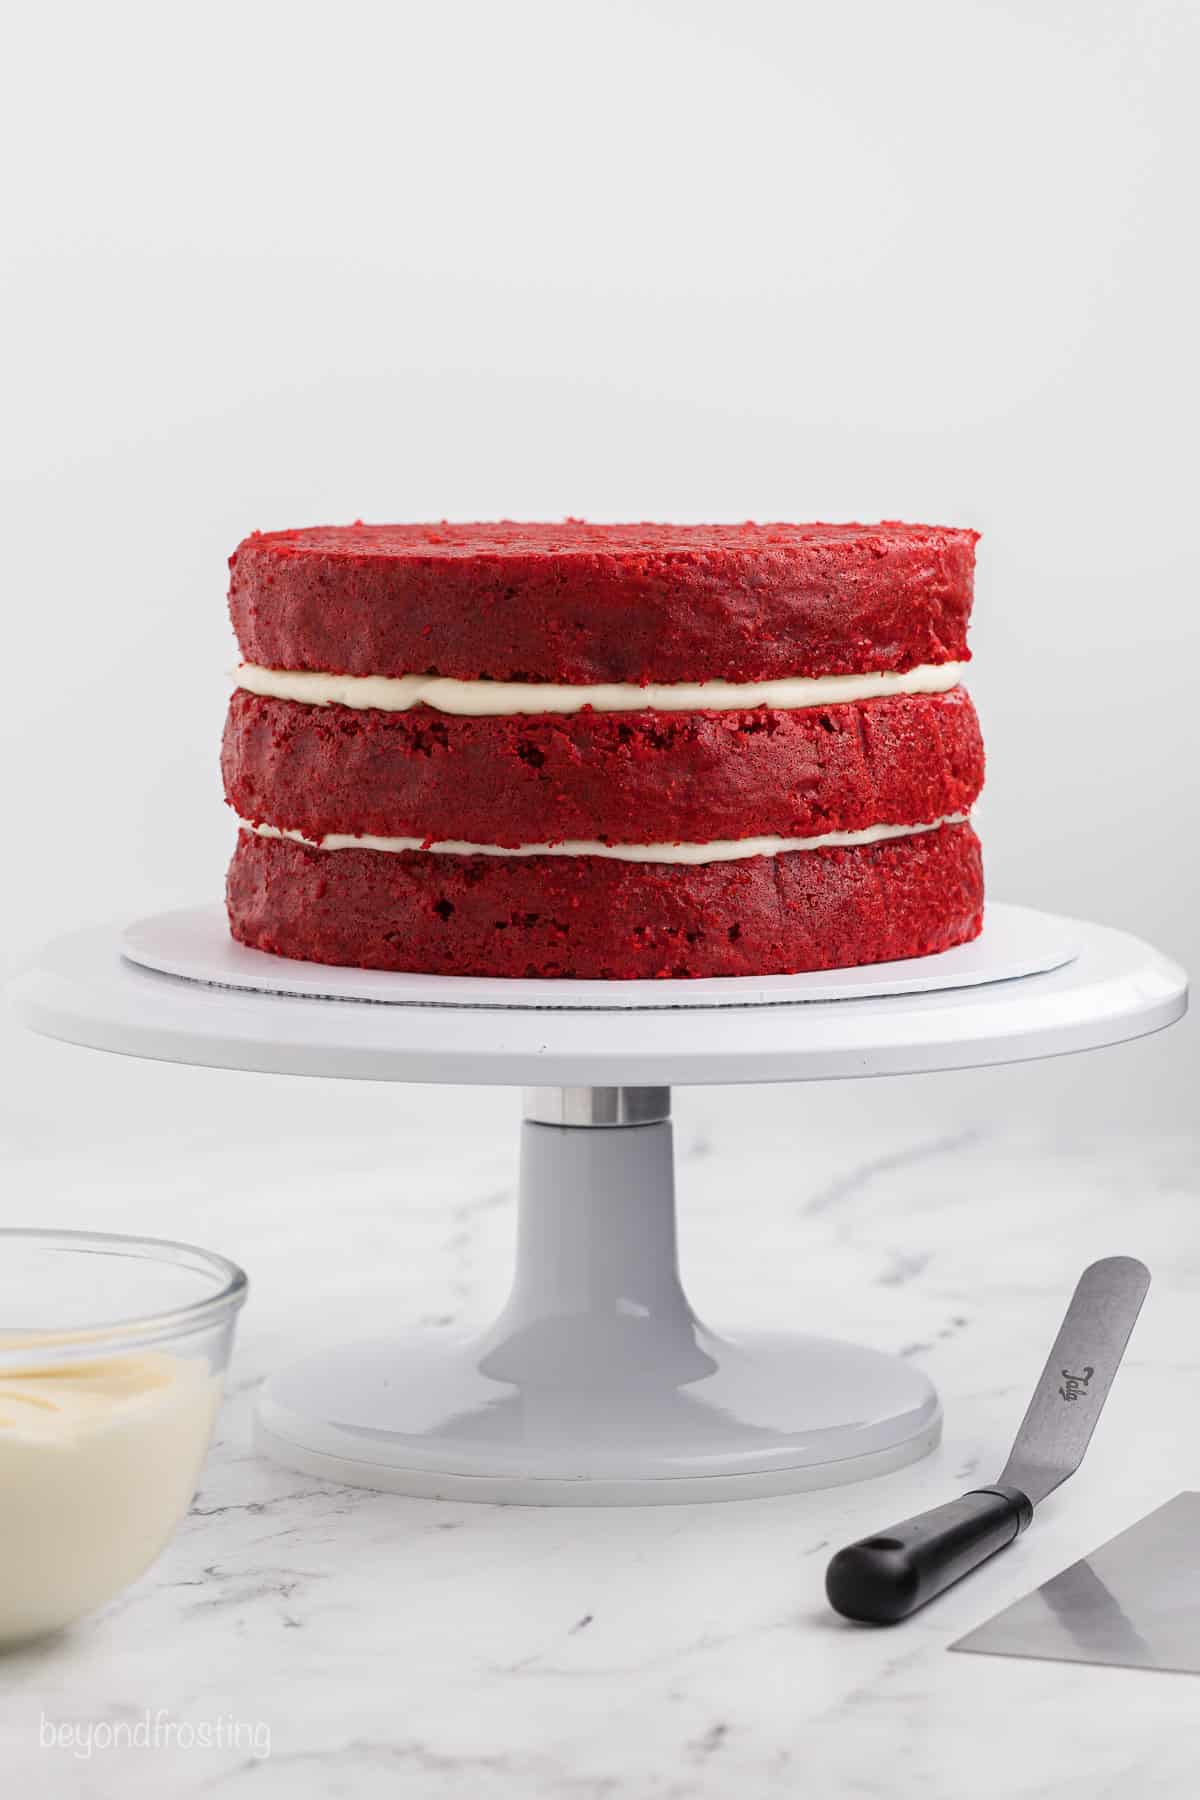 Assembled red velvet layer cake on a cake stand.